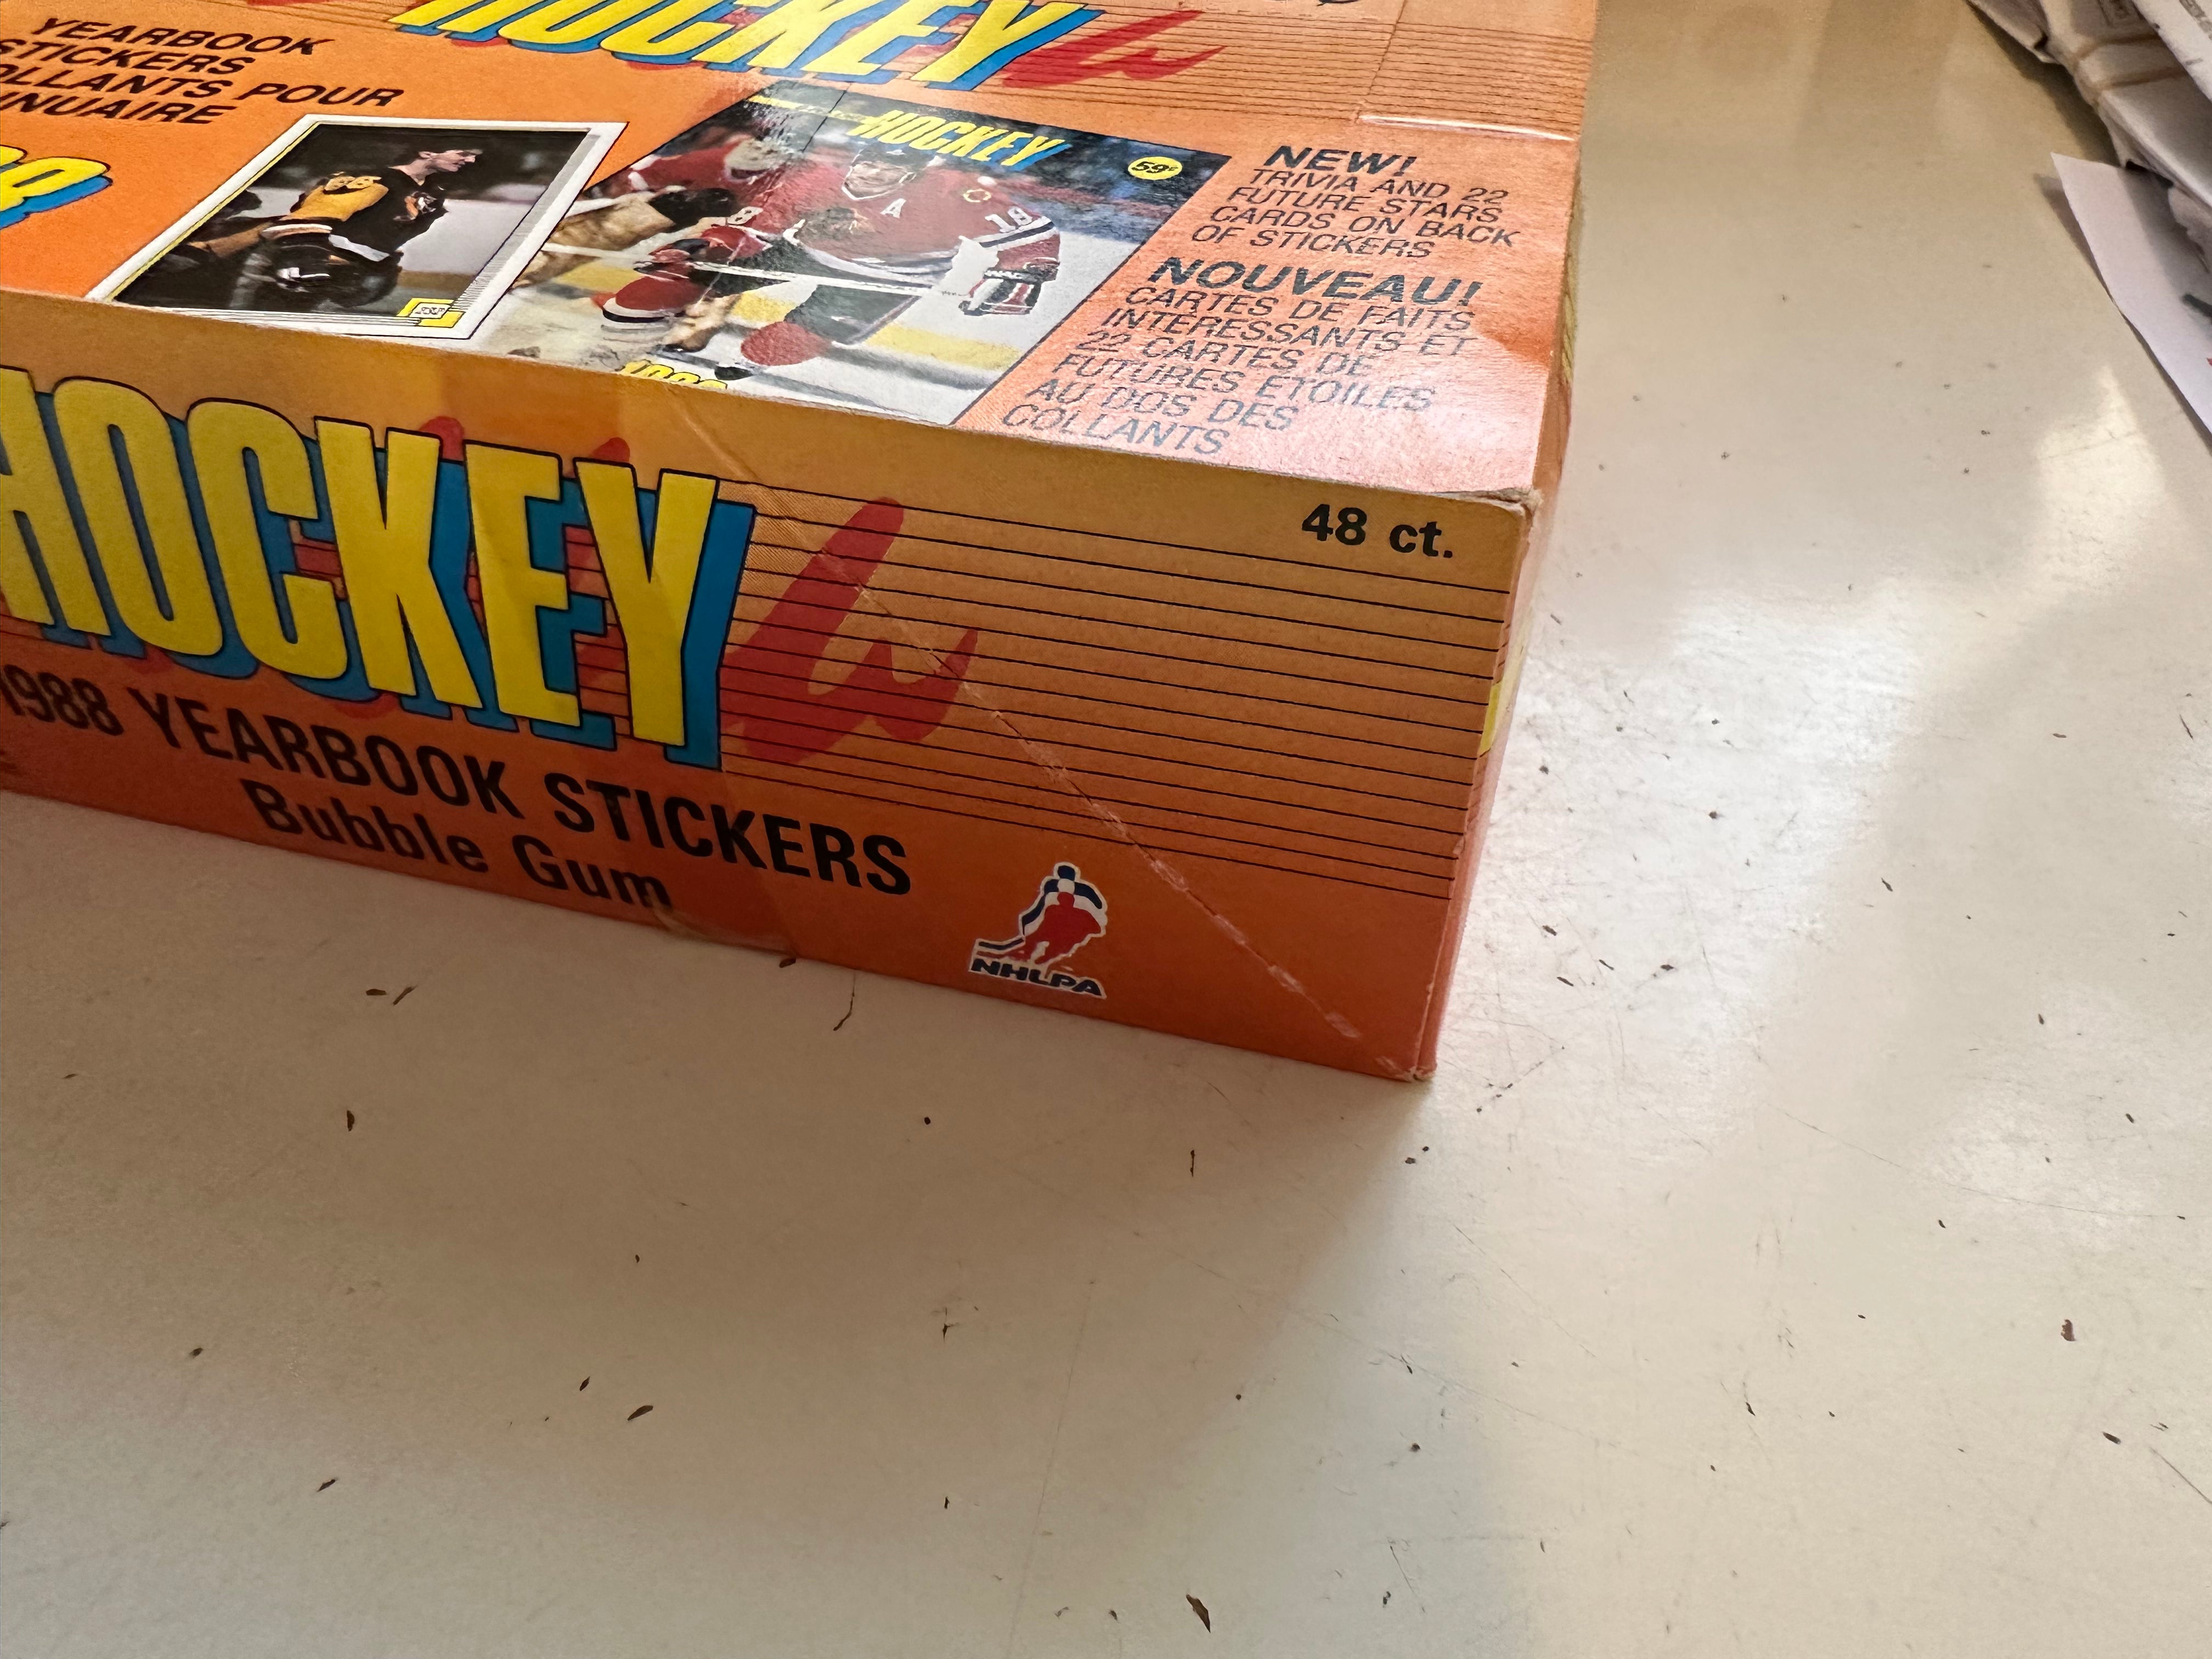 1988 Opc yearbook stickers 48 packs box